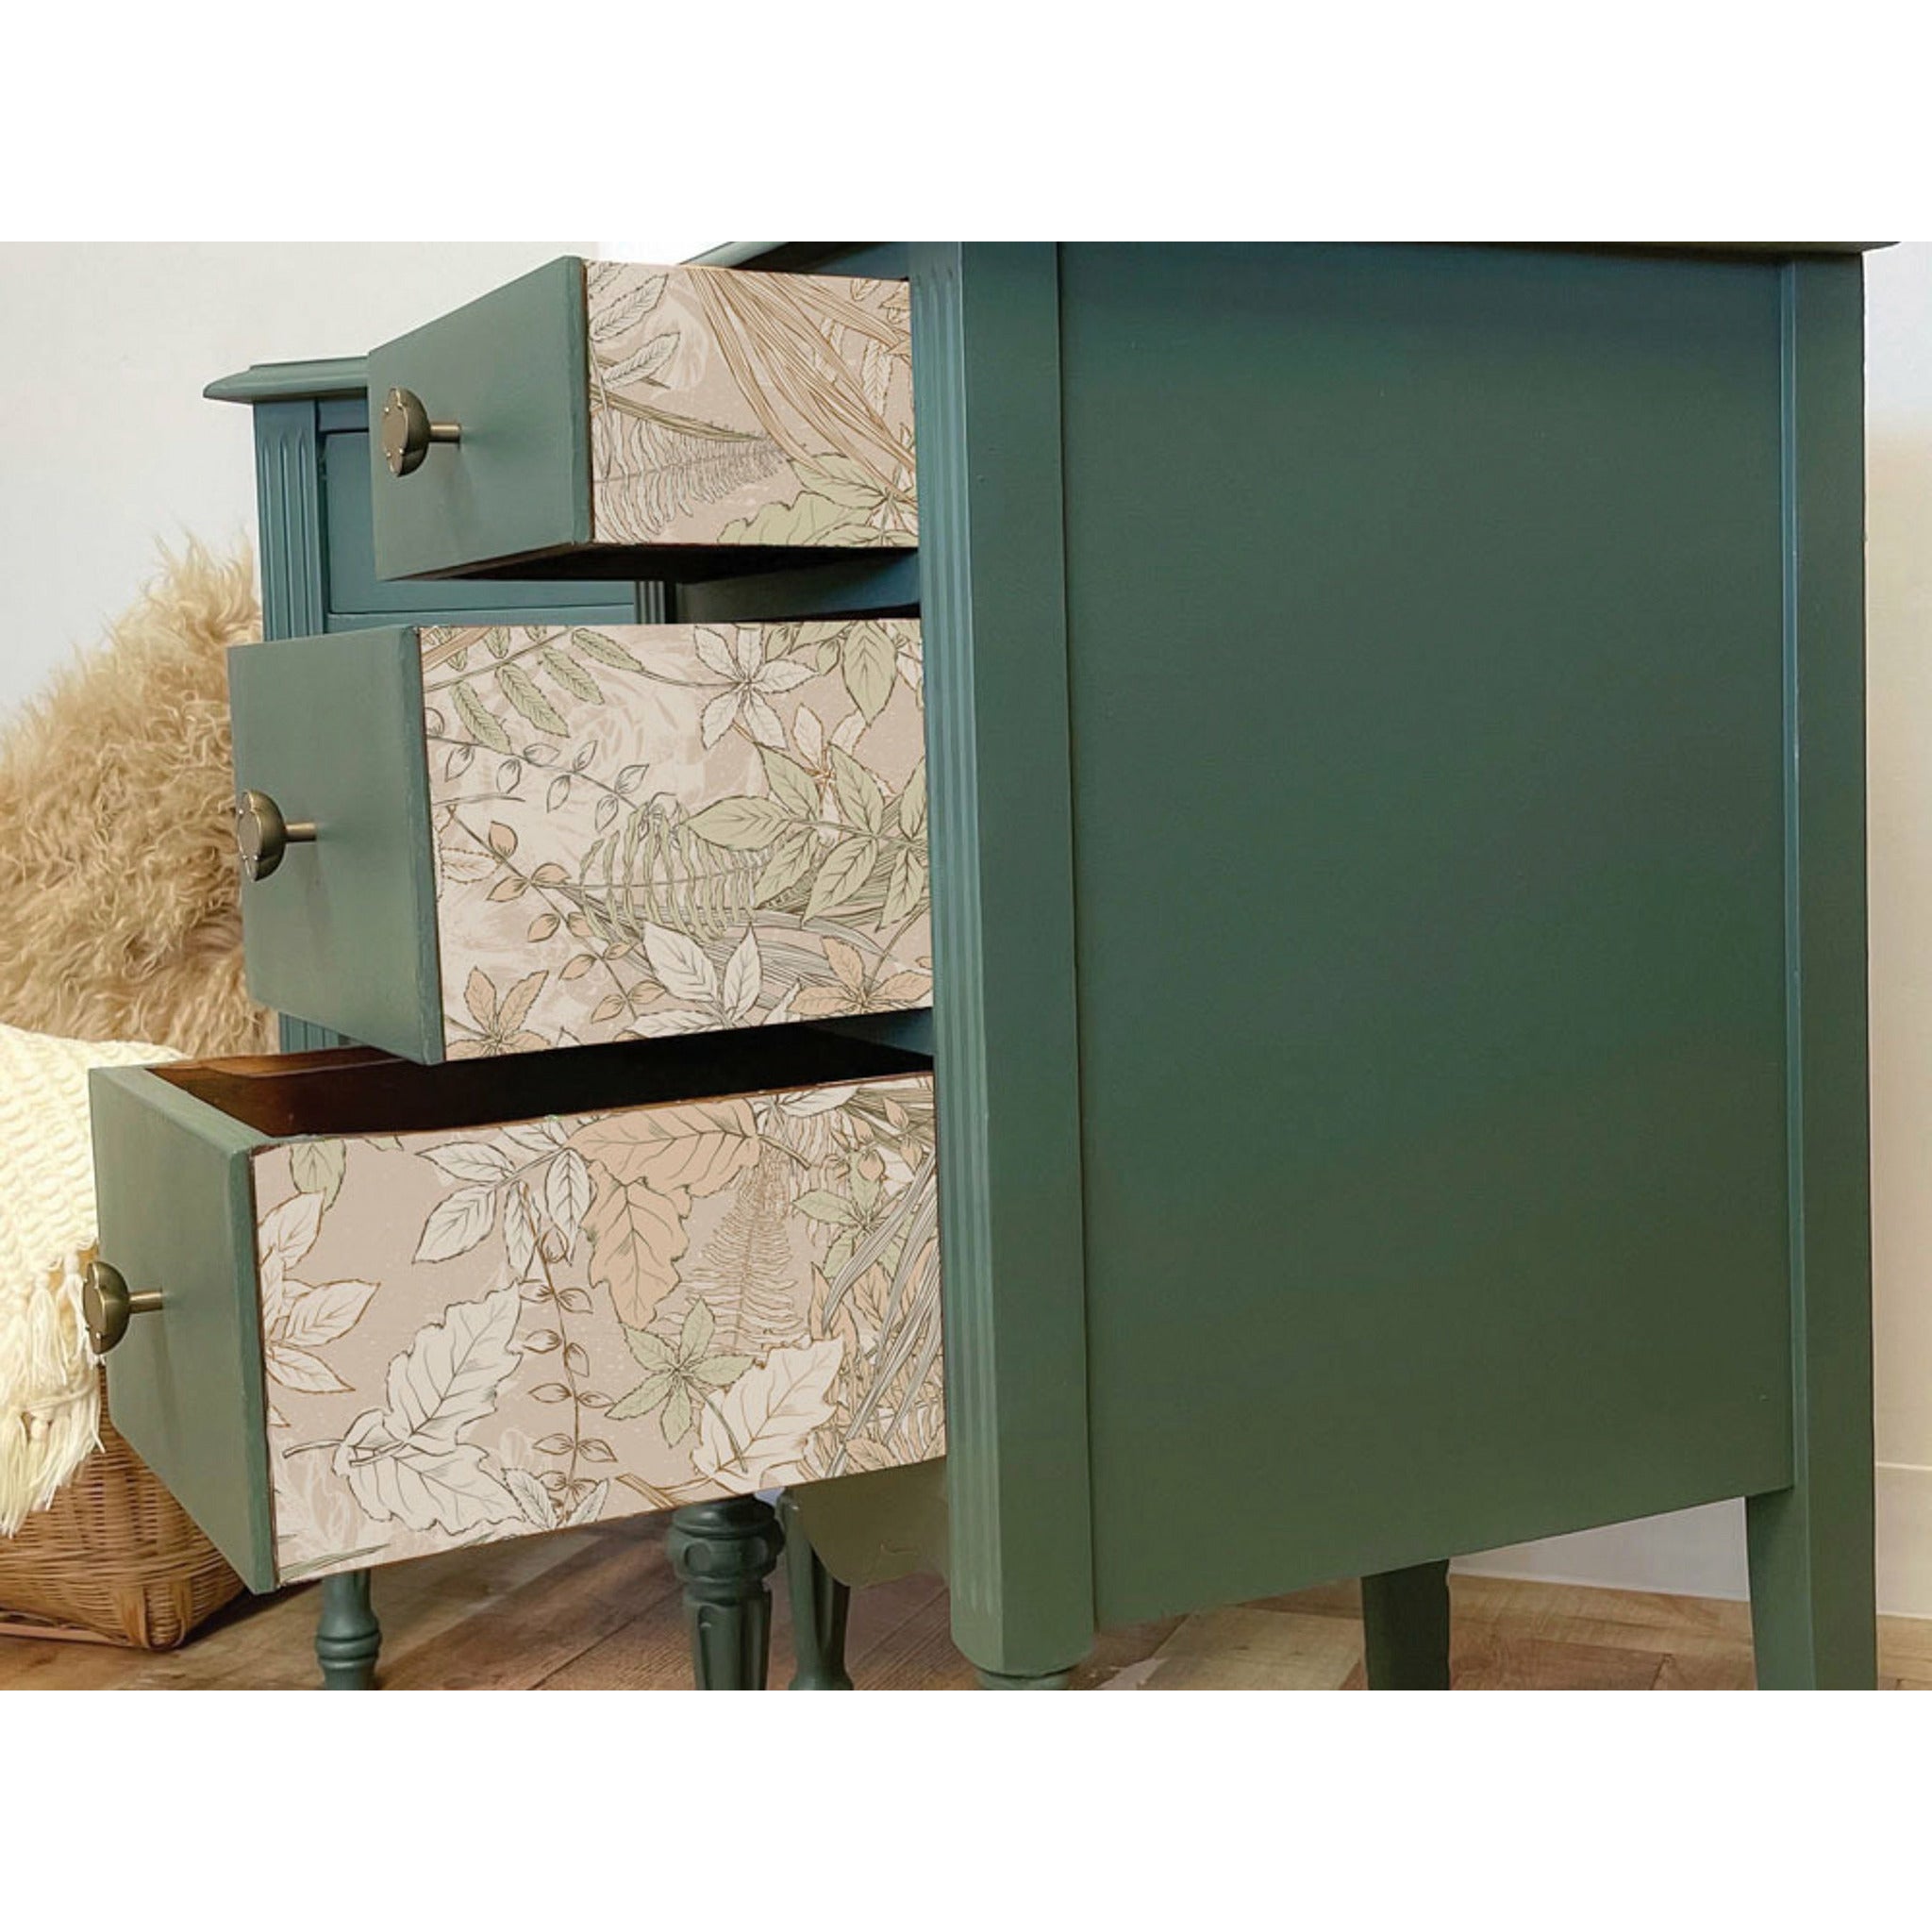 A side view of a dark muted moss green colored dresser with the drawers half way pulled out. The Tranquil Autumn tissue paper is seen placed on the side of the drawers.